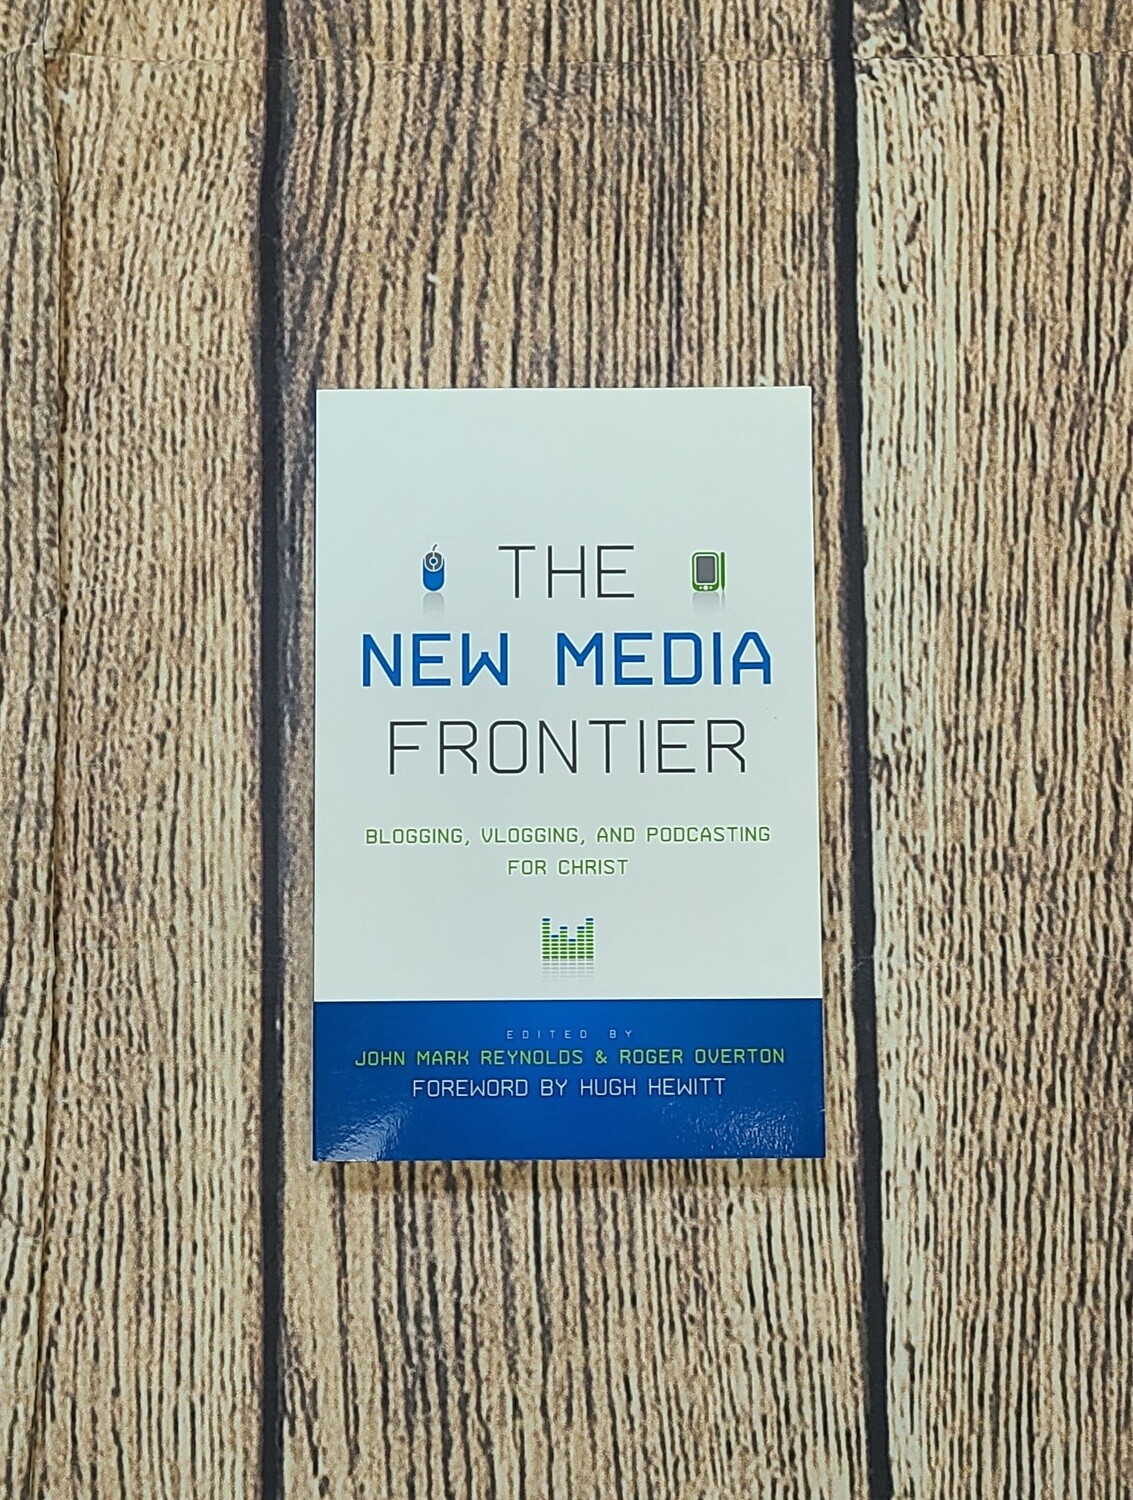 The New media Frontier: Blogging, Vlogging, and Podcasting for Christ by John Mark Reynolds and Roger Overton